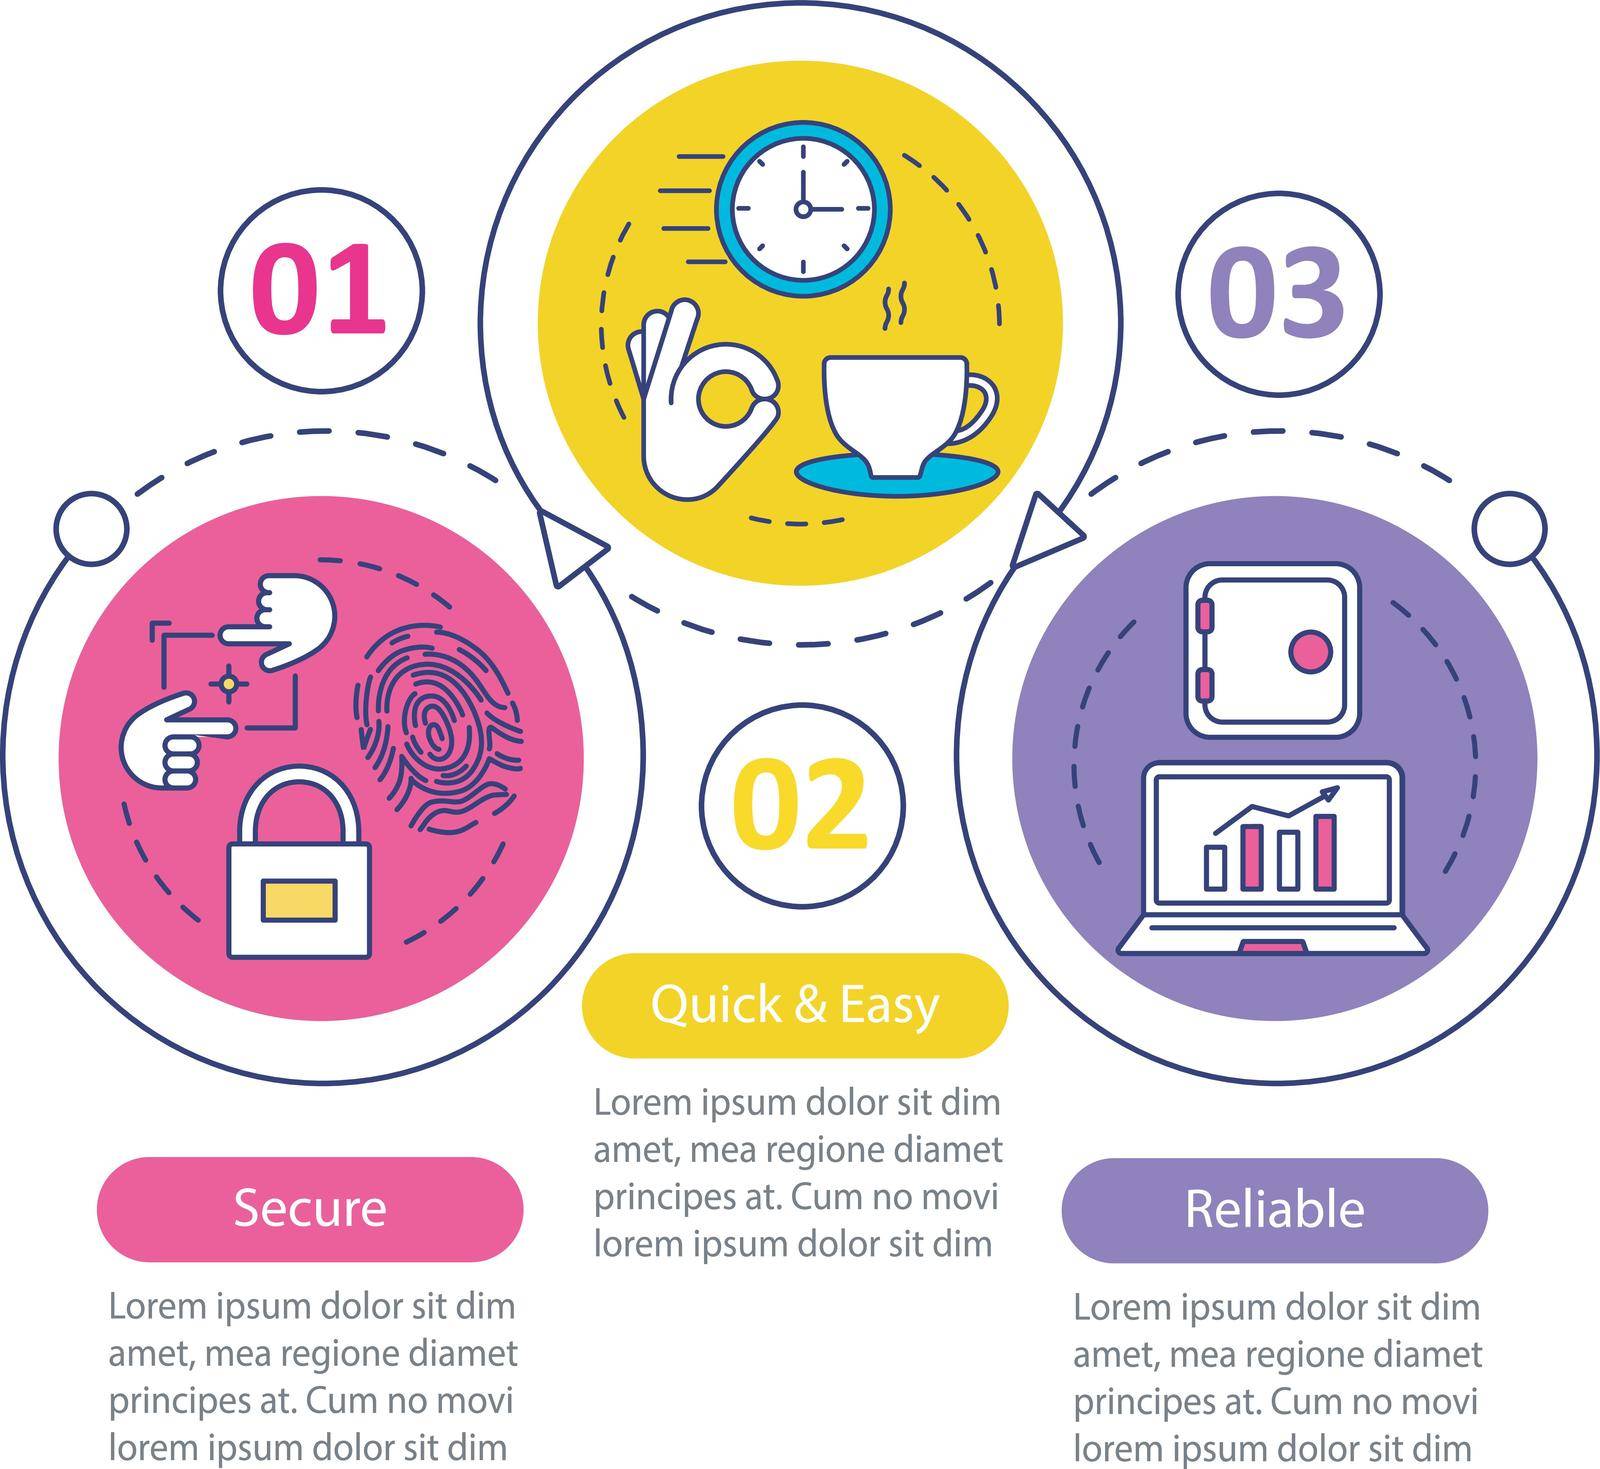 Digital service vector infographic template. Quick and easy, secure, reliable software. Data visualization with three steps and options. Process timeline chart. Workflow layout with icons